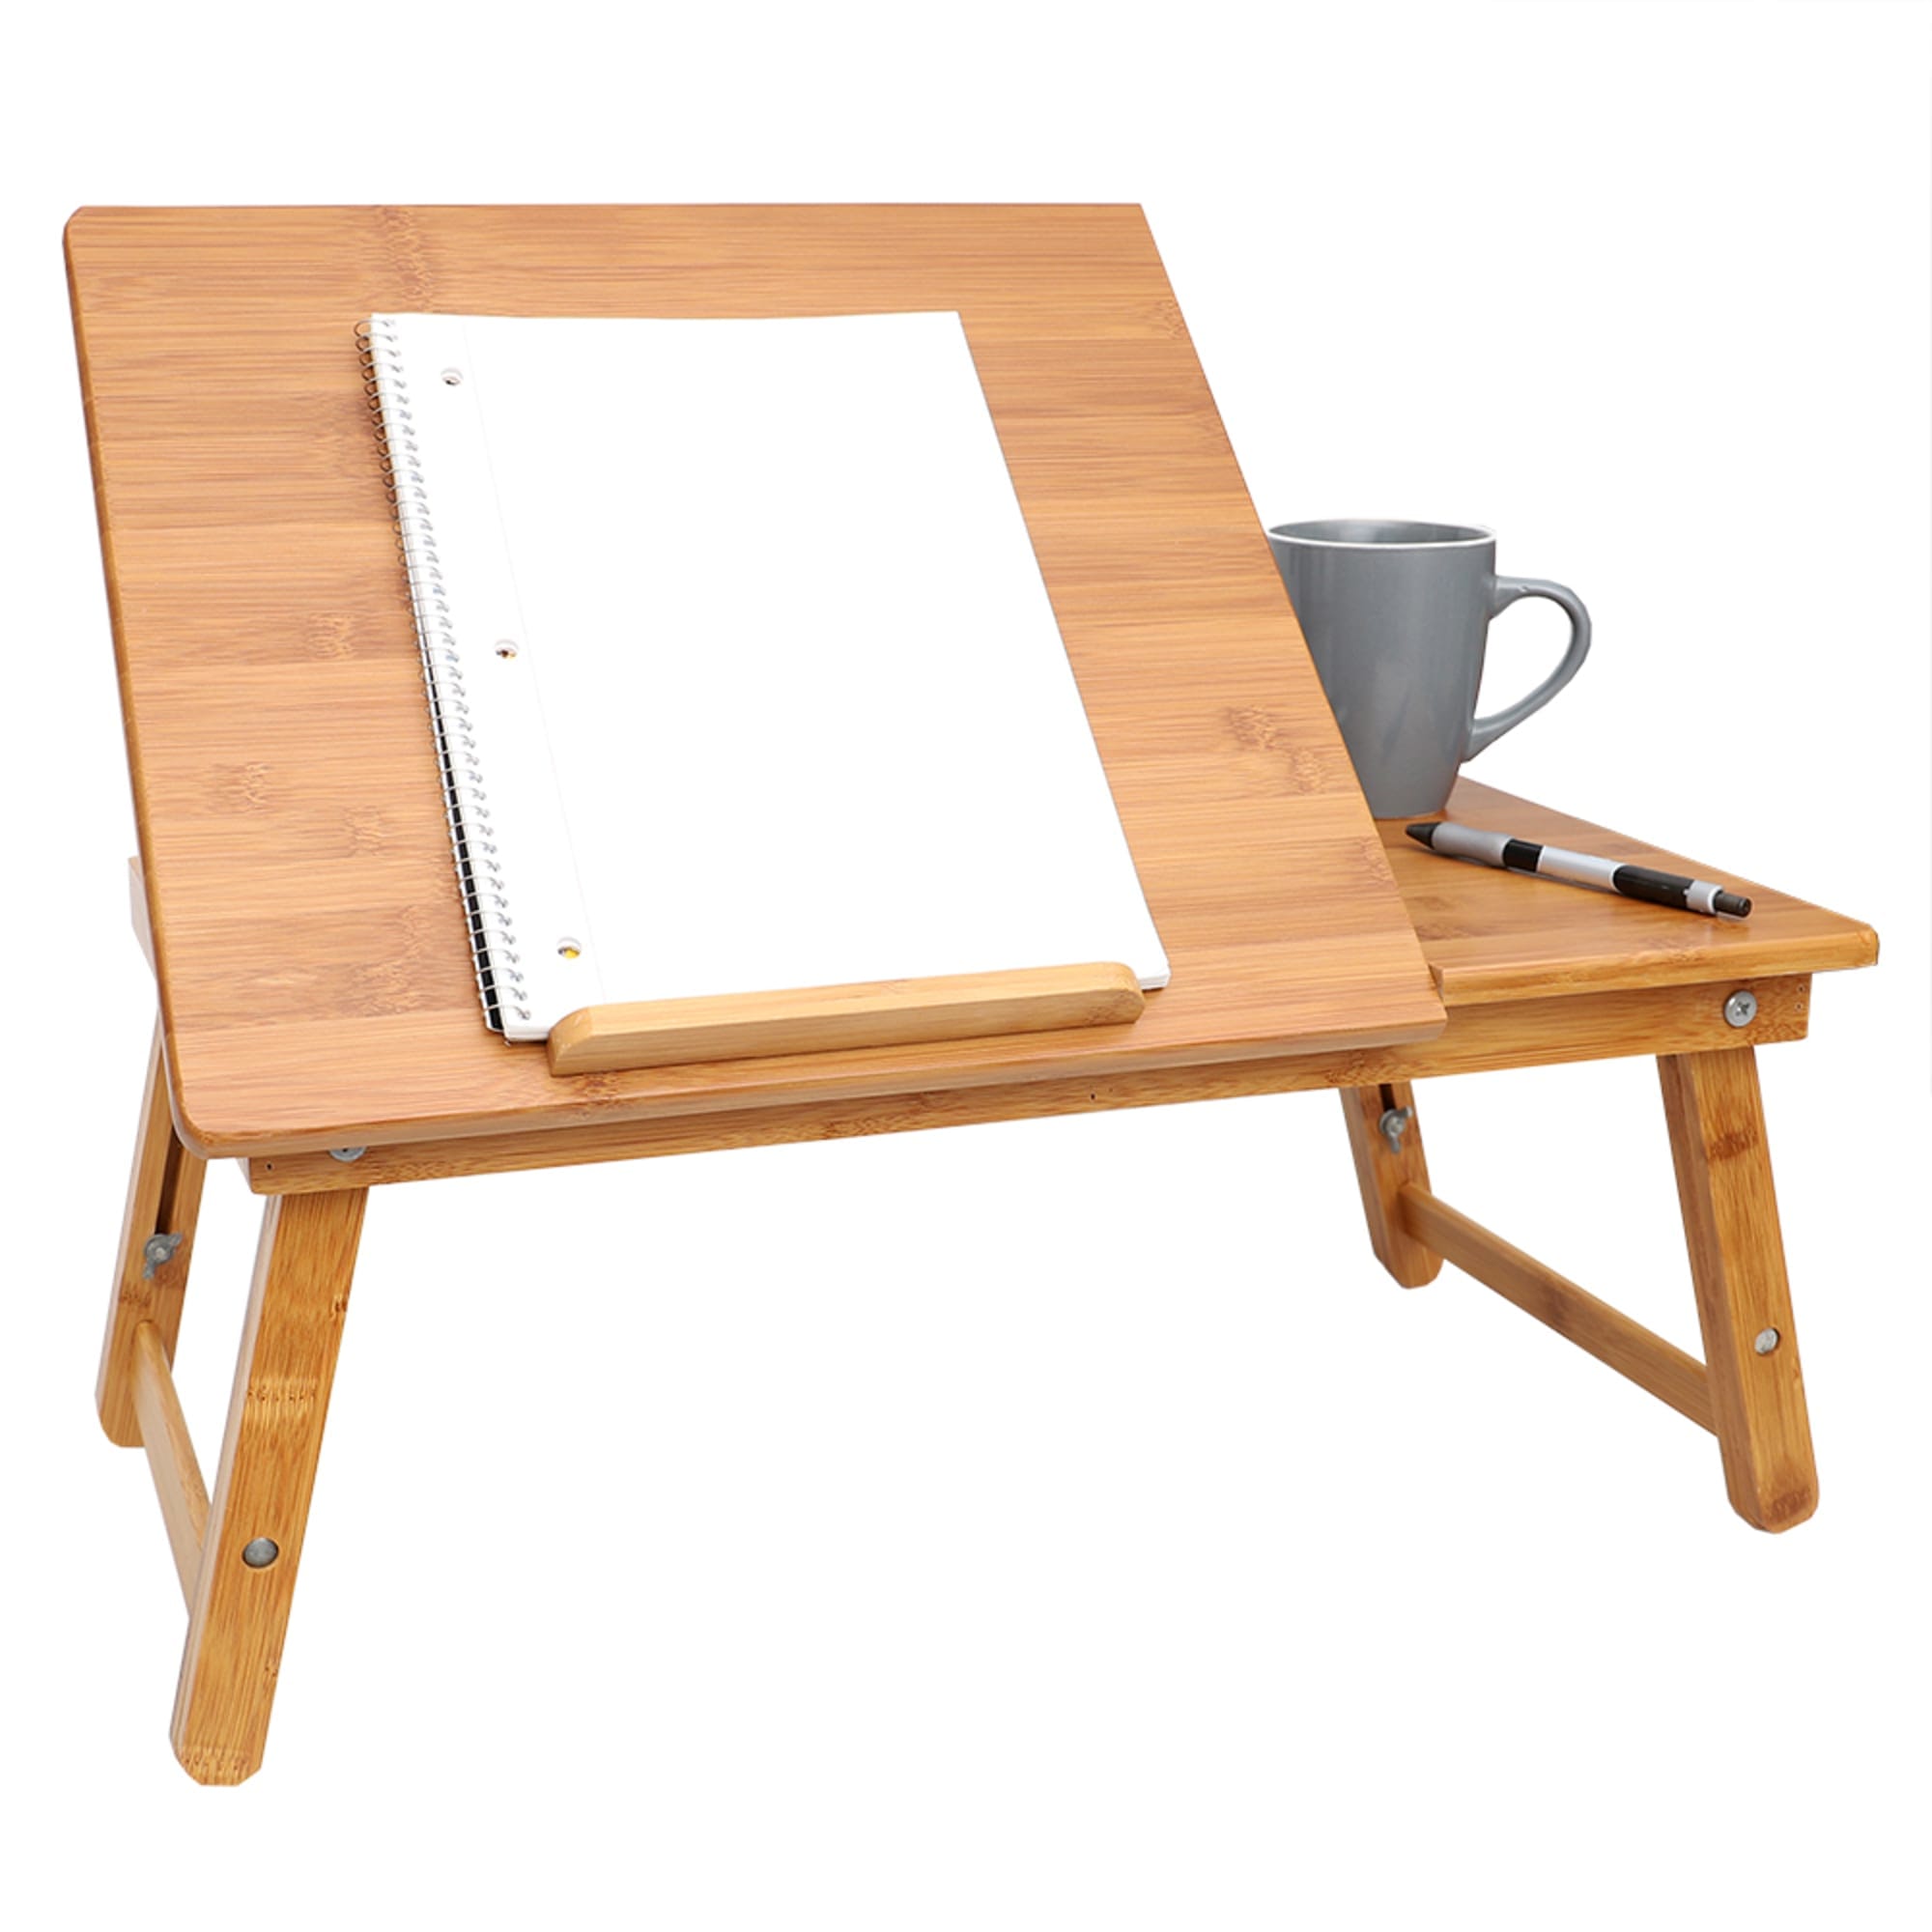 Home Basics Bamboo Laptop Tray with Pull-out Drawer, Natural $20 EACH, CASE PACK OF 6